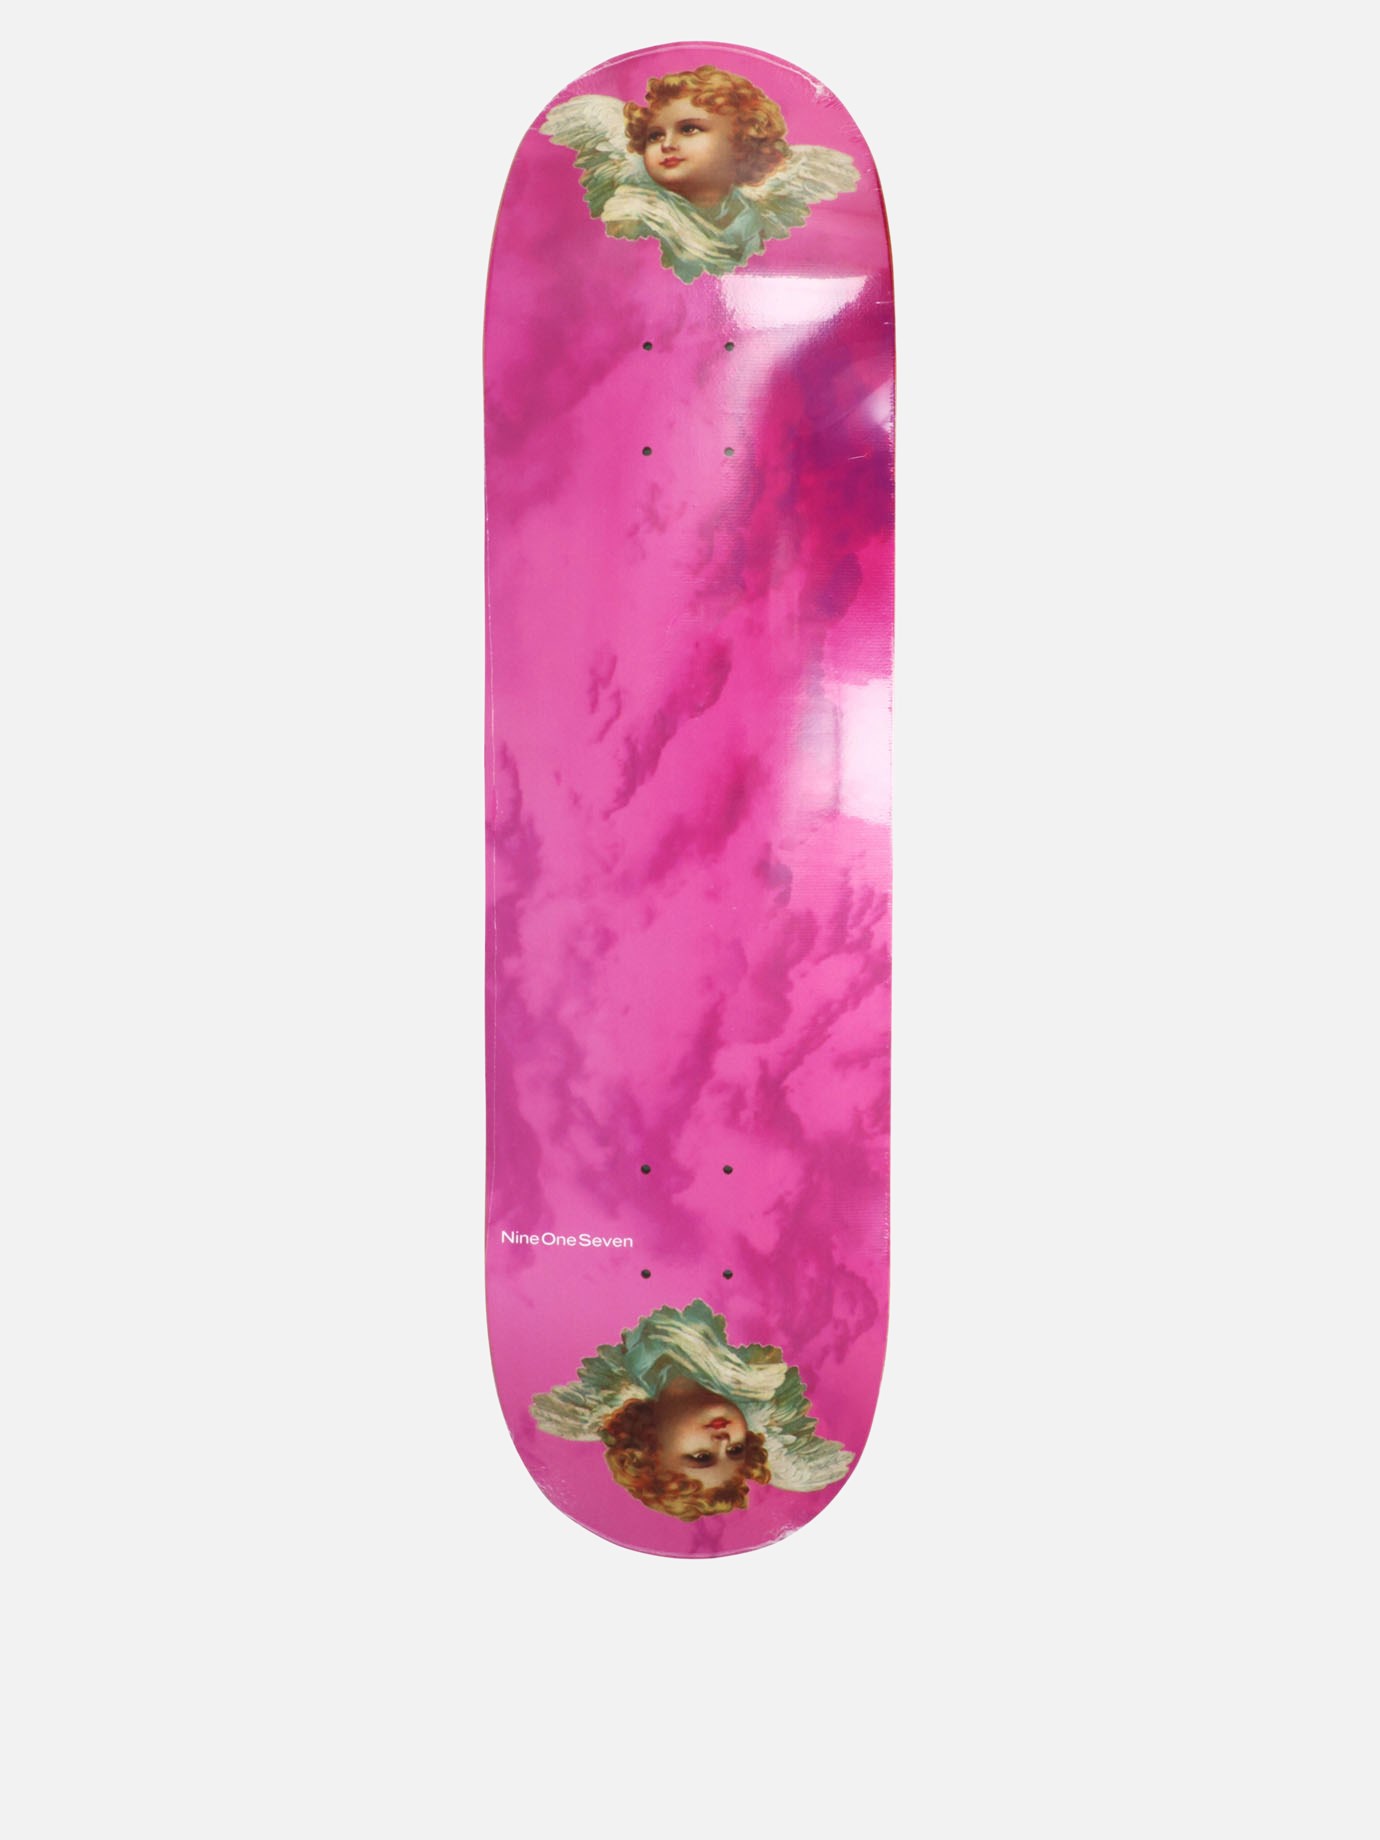  Guardian Pink Slick Deck 8.25  skateboard by Call Me 917